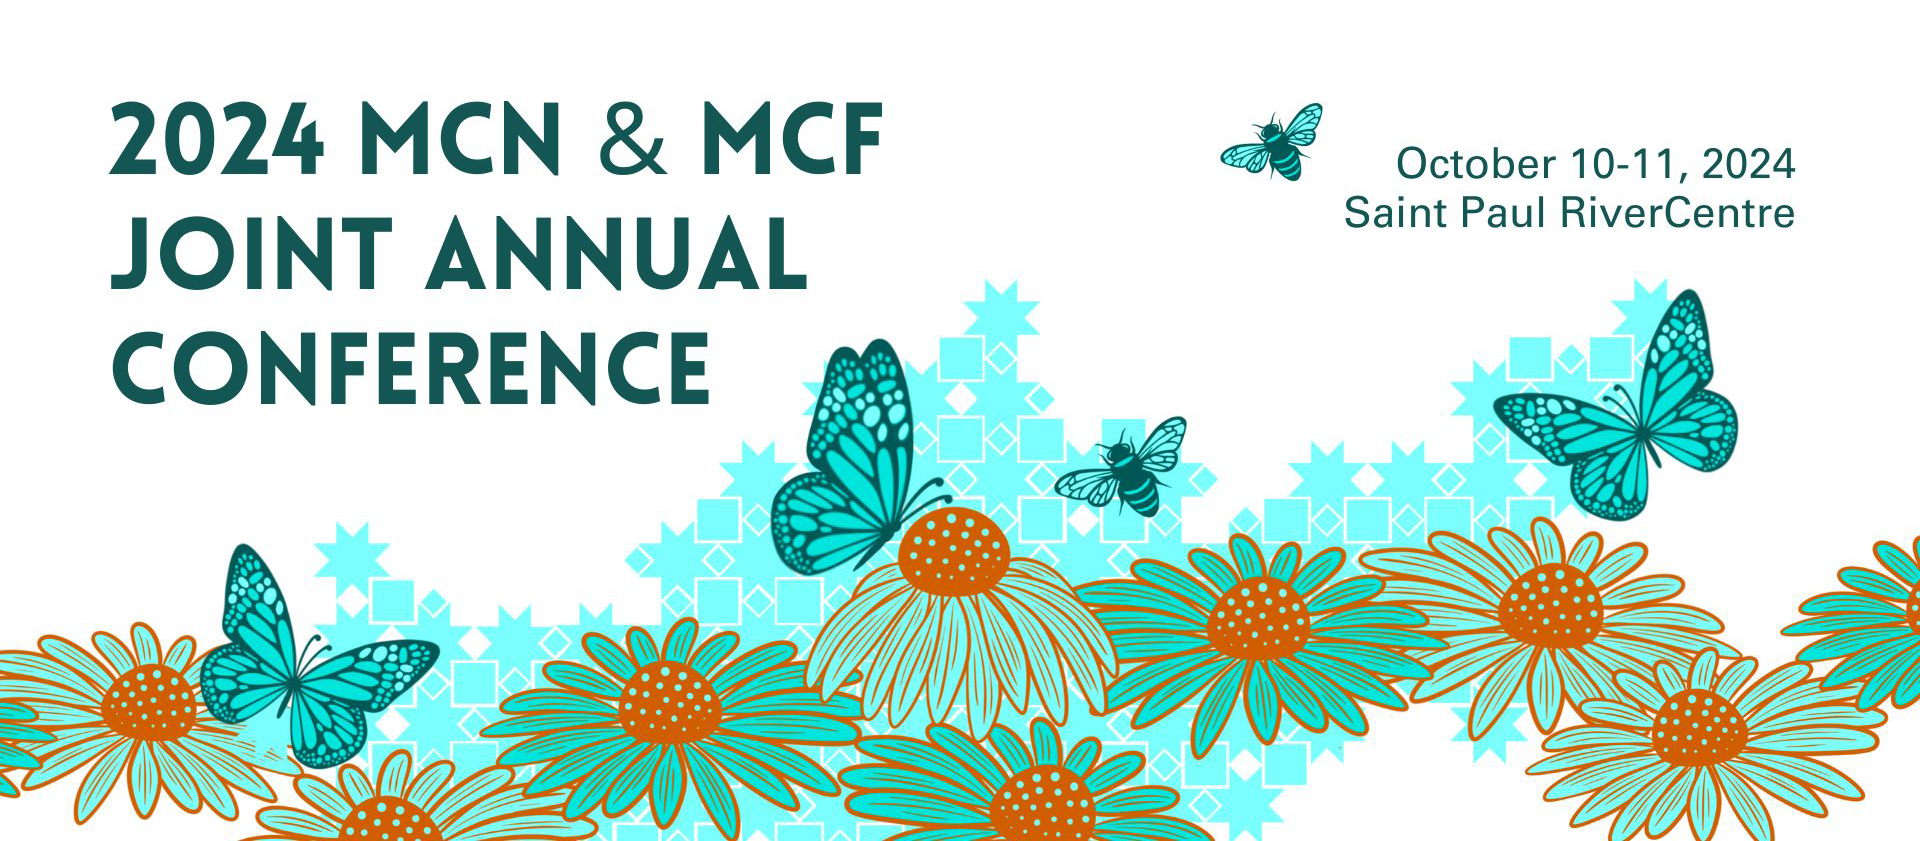 2024 MCN & MCF Joint Annual Conference logo featuring sunflowers, butterflies, and bees